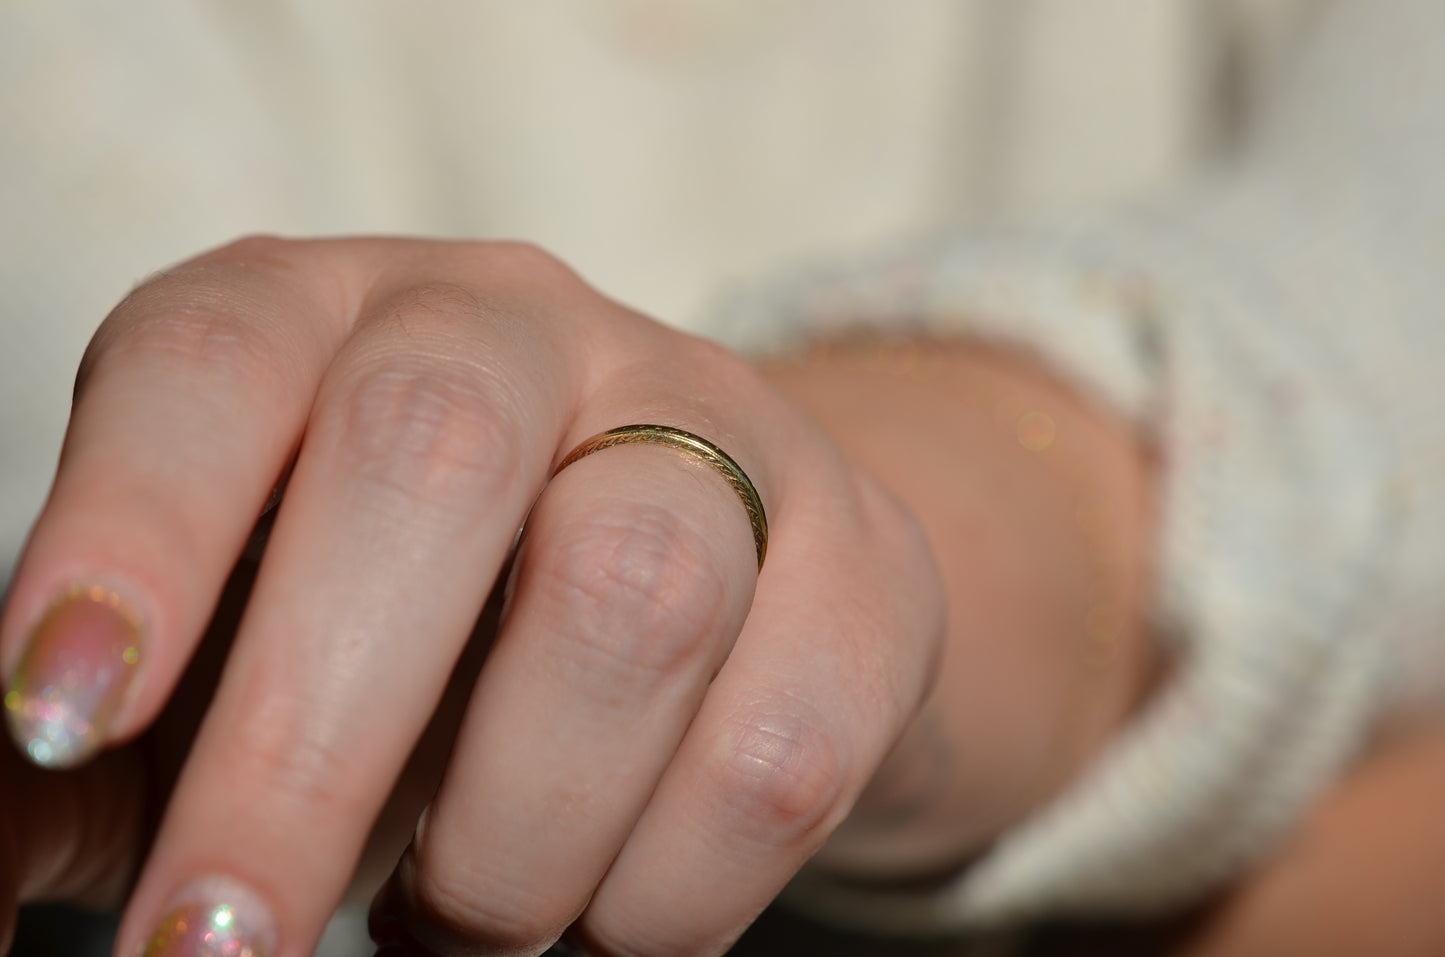 ring is modeled on the left ring finger of a caucasian model, with the hand angled so that the engraved sides of the band are visible.